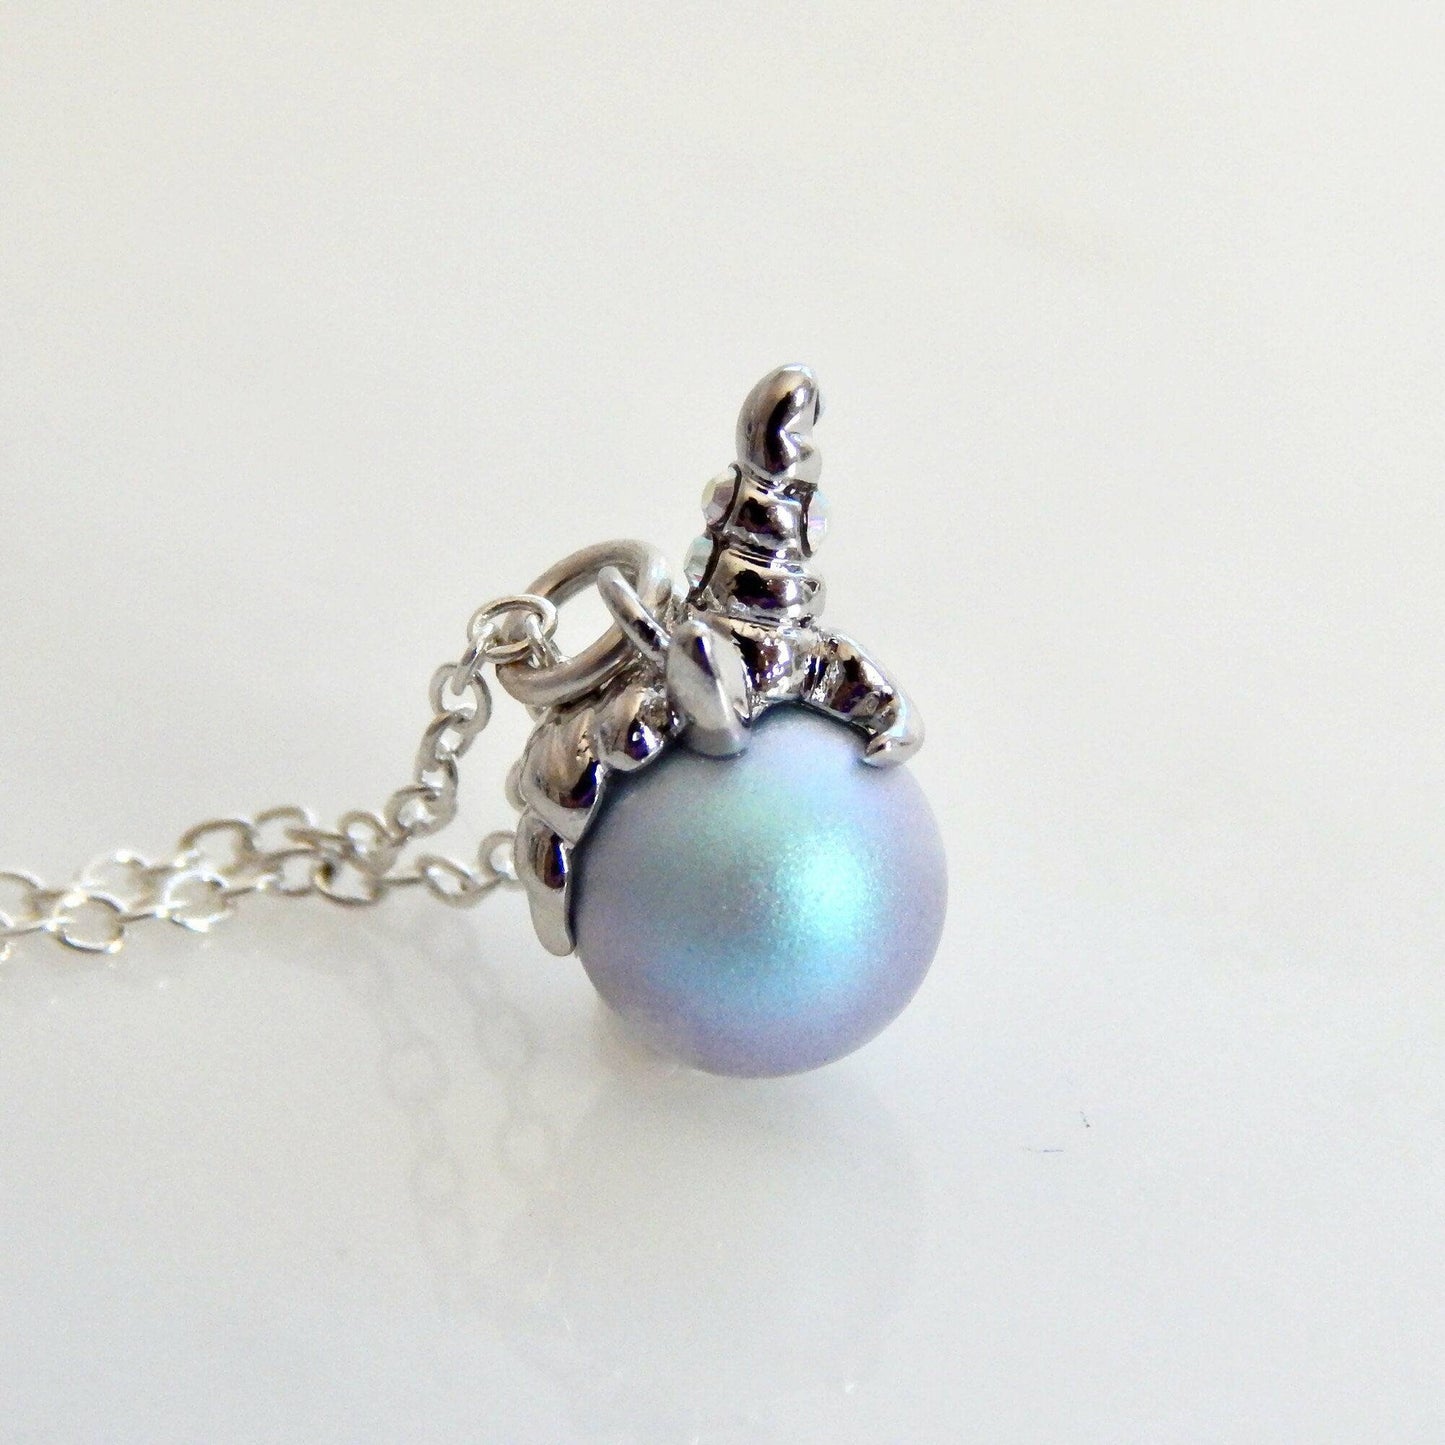 Blue unicorn pearl and crystal necklace